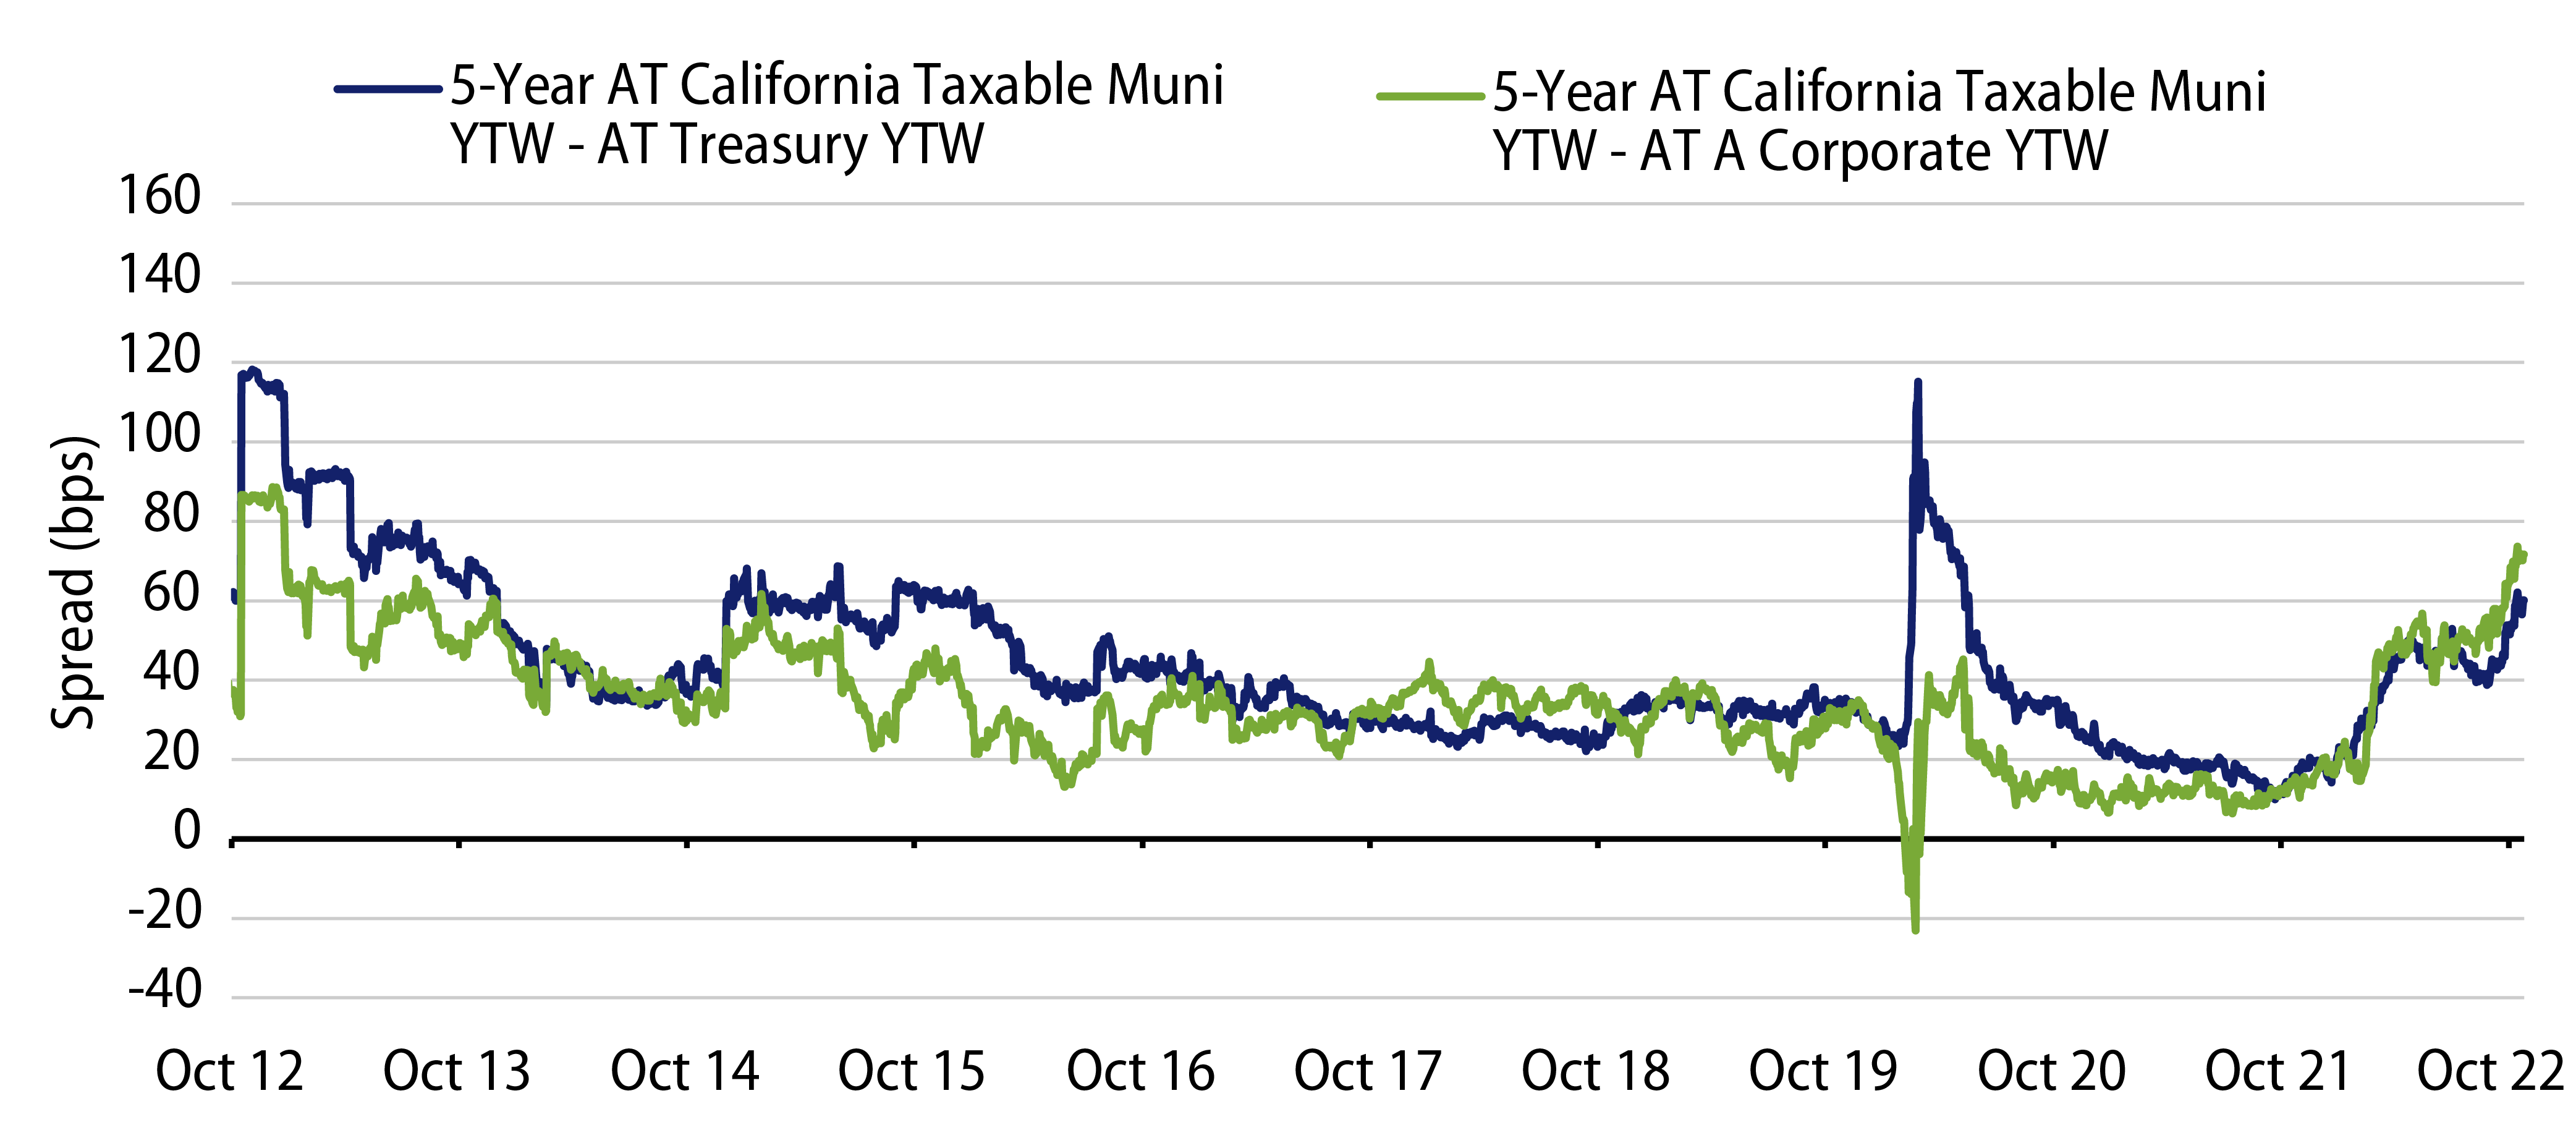 5-Year After-Tax CA Taxable Muni vs. Treasury and Corporate Spreads